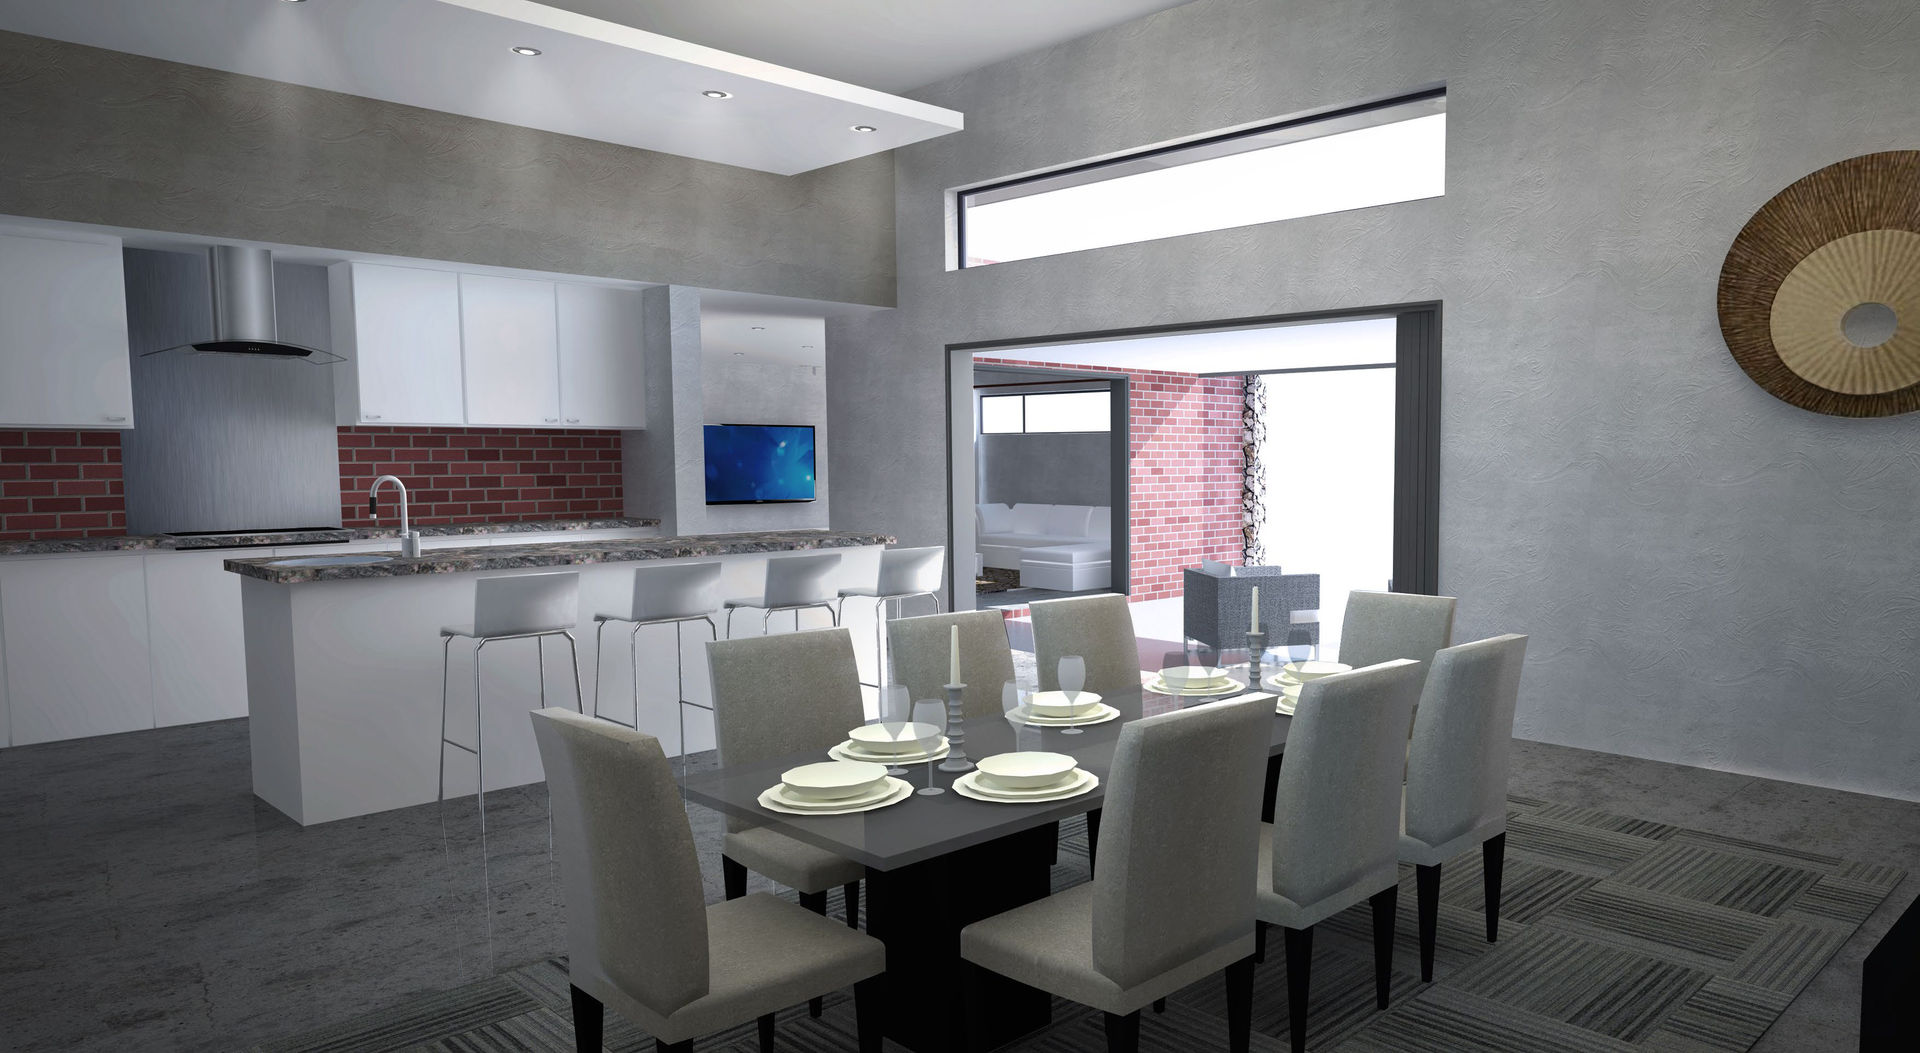 New Dining Room & Kitchen A4AC Architects Kitchen units Granite new dining room,new house,modern,open plan